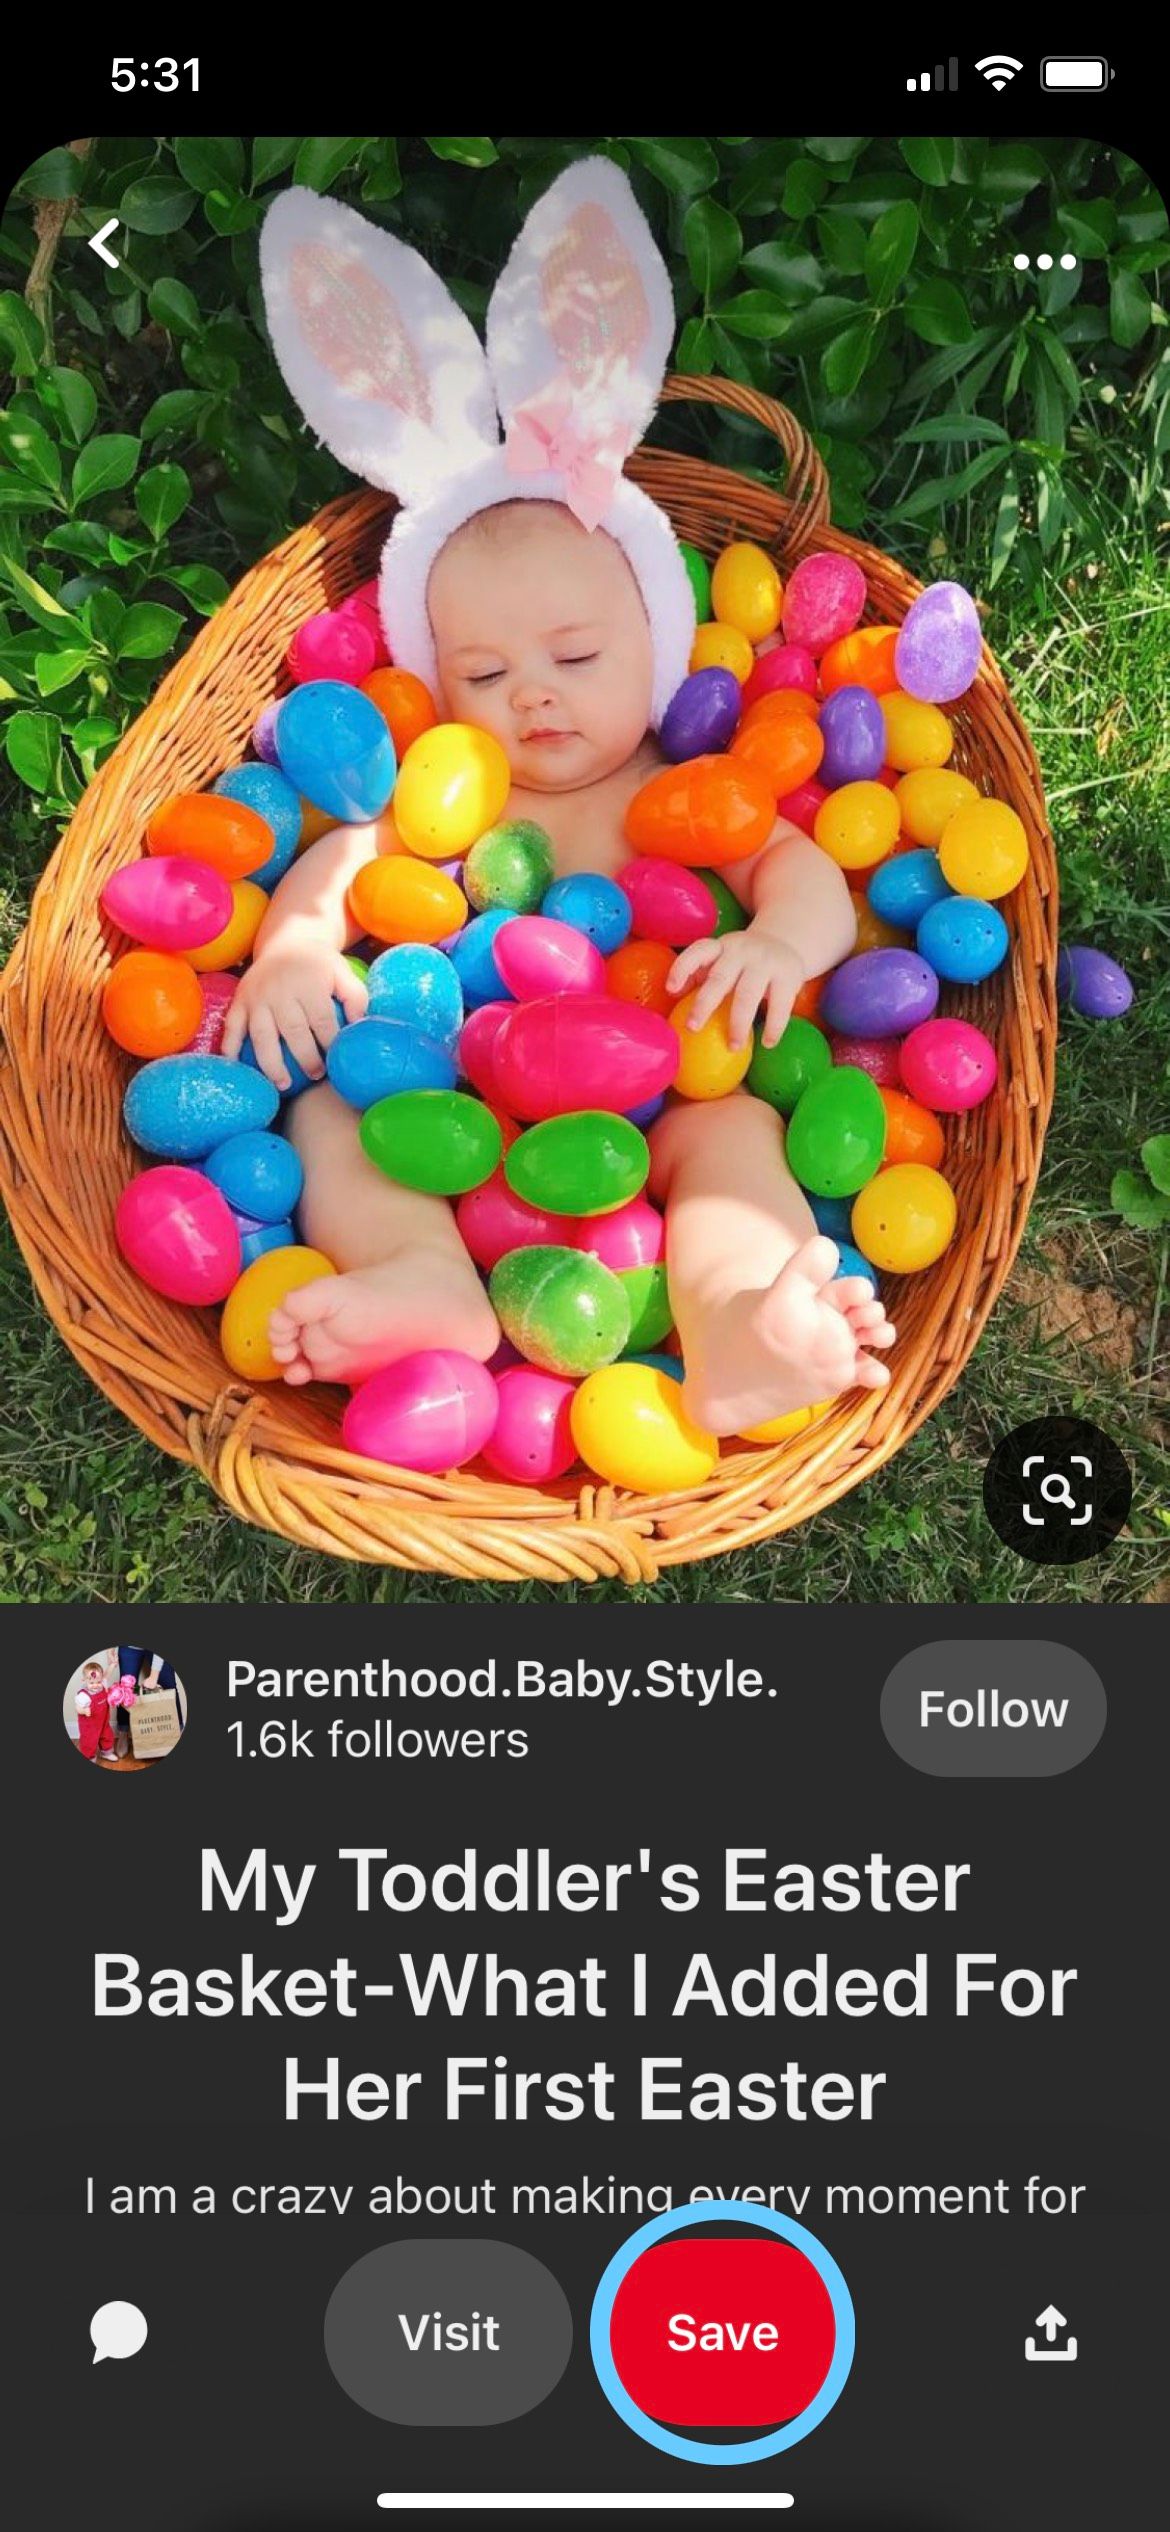 Pinterest Plastic Easter Eggs with Baby in Bunny Ears.